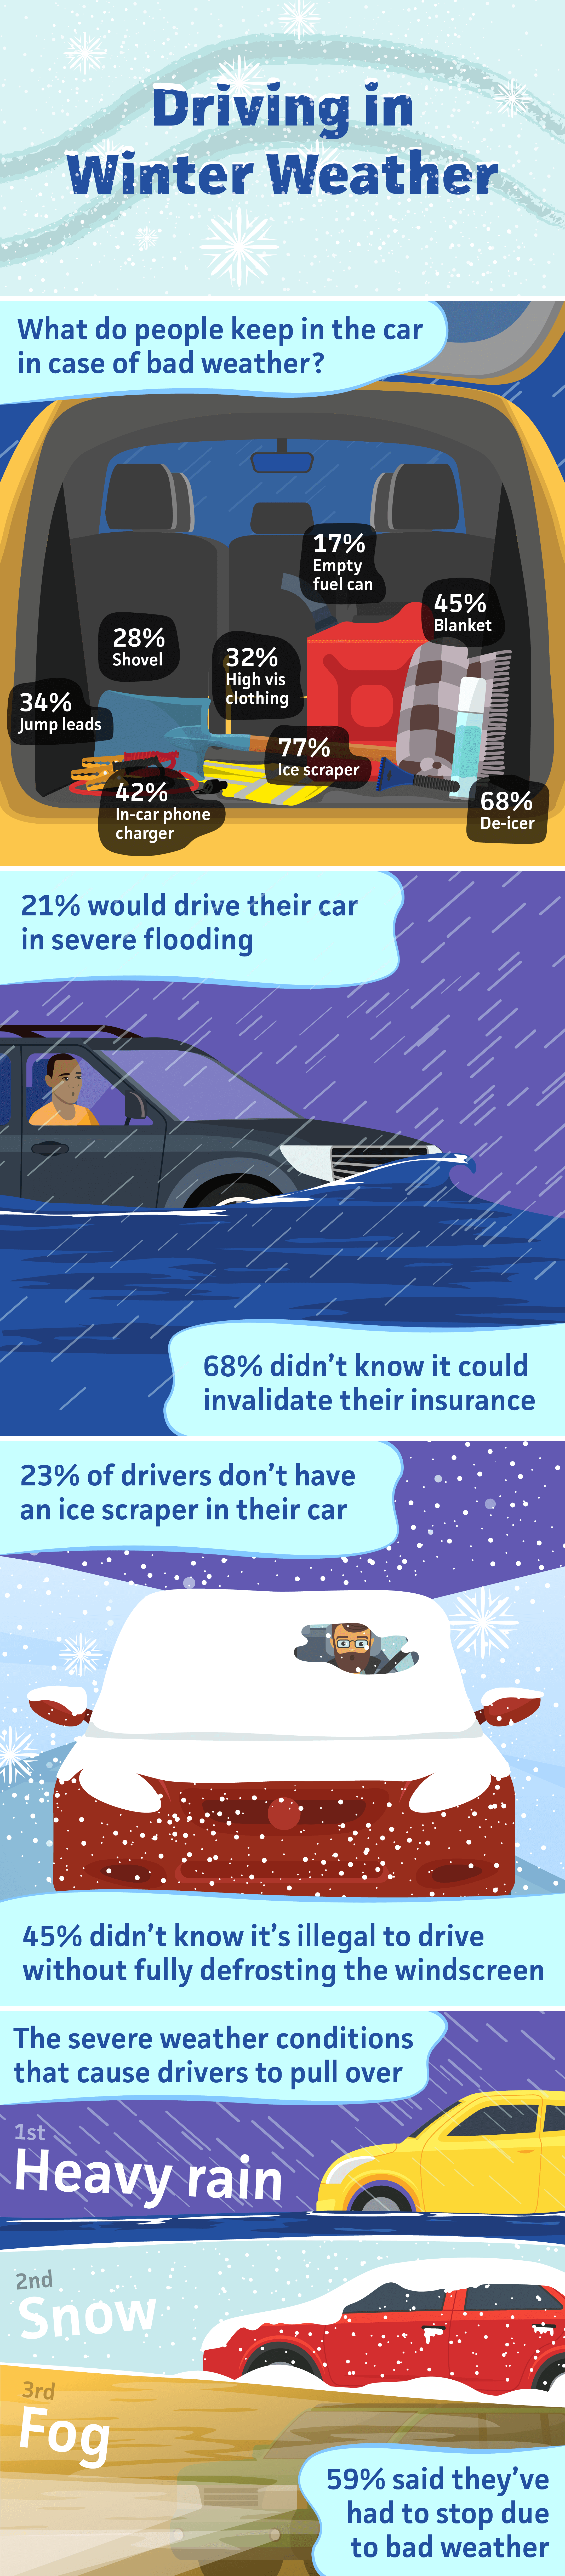 Infographic about driving in winter weather